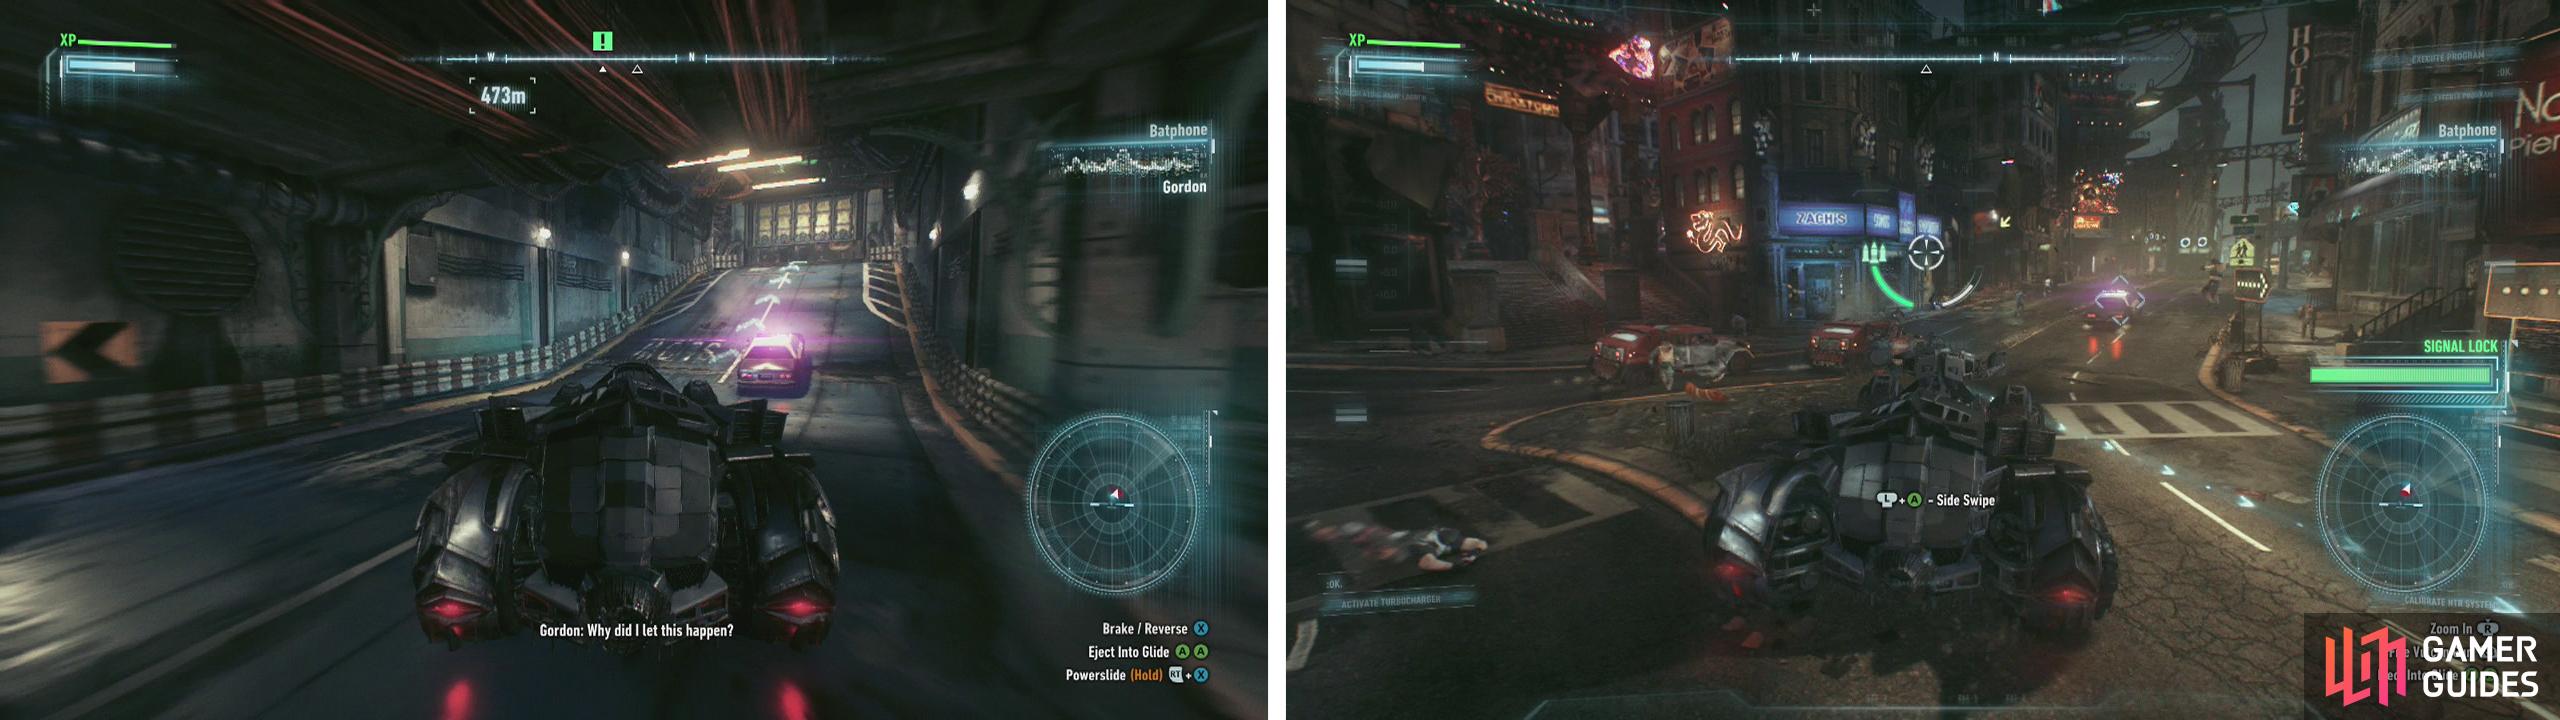 Exit the garage (left) and destroy the vehicles that attack Gordon (right).